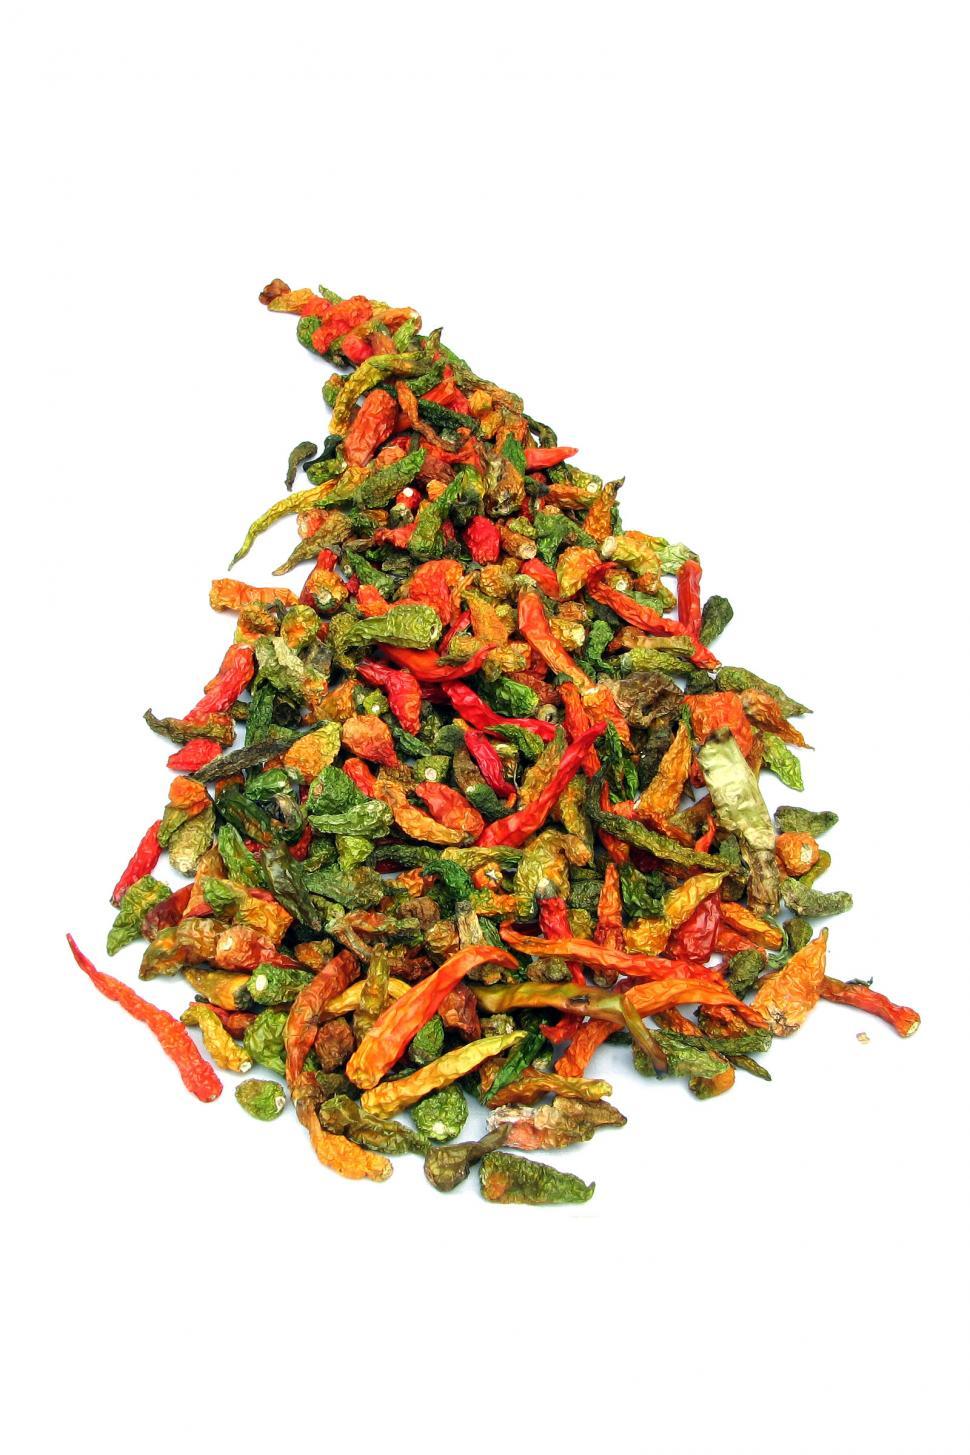 Free Image of Hot dry Chillies 